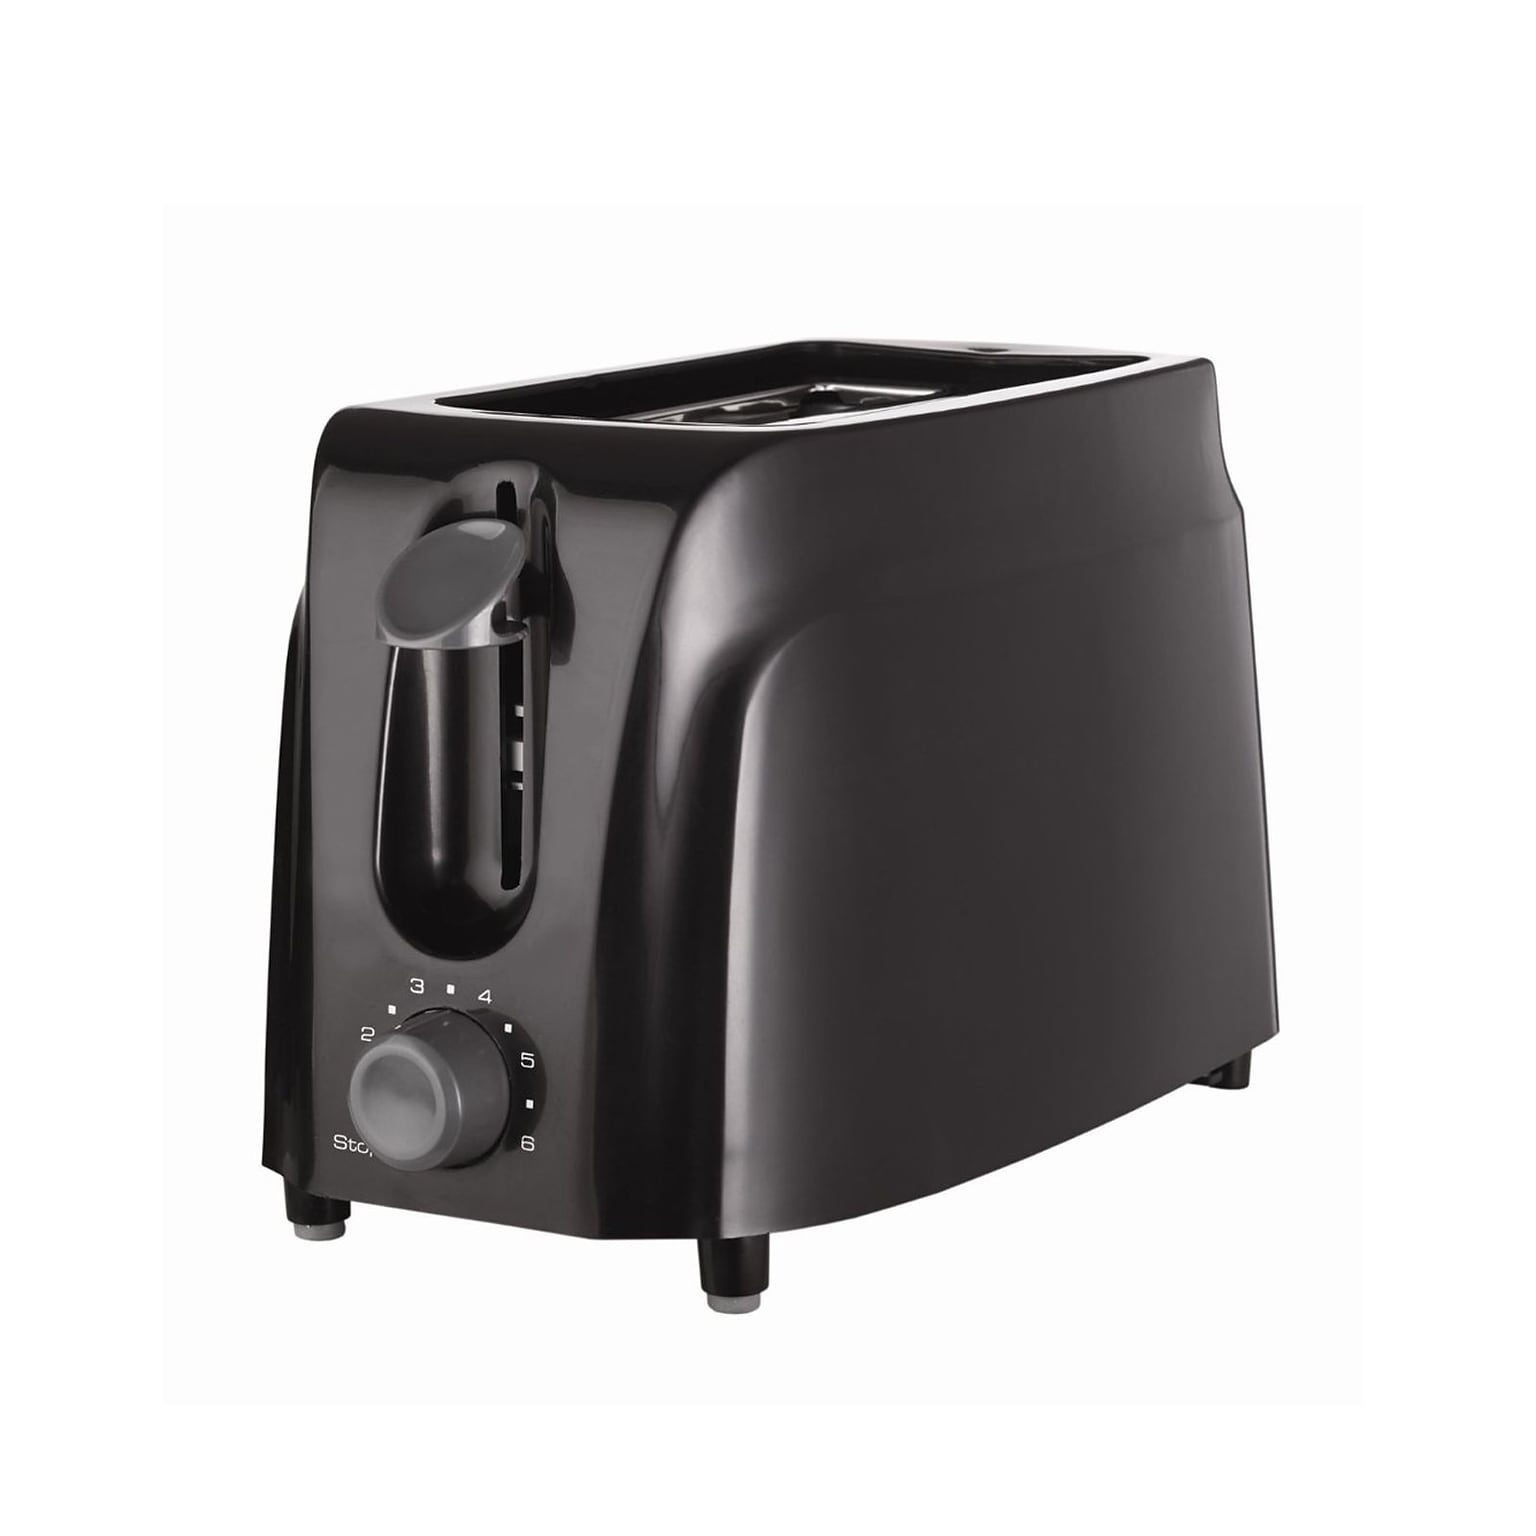 Better Chef 2 Slices Toaster; Black (ts-260b)